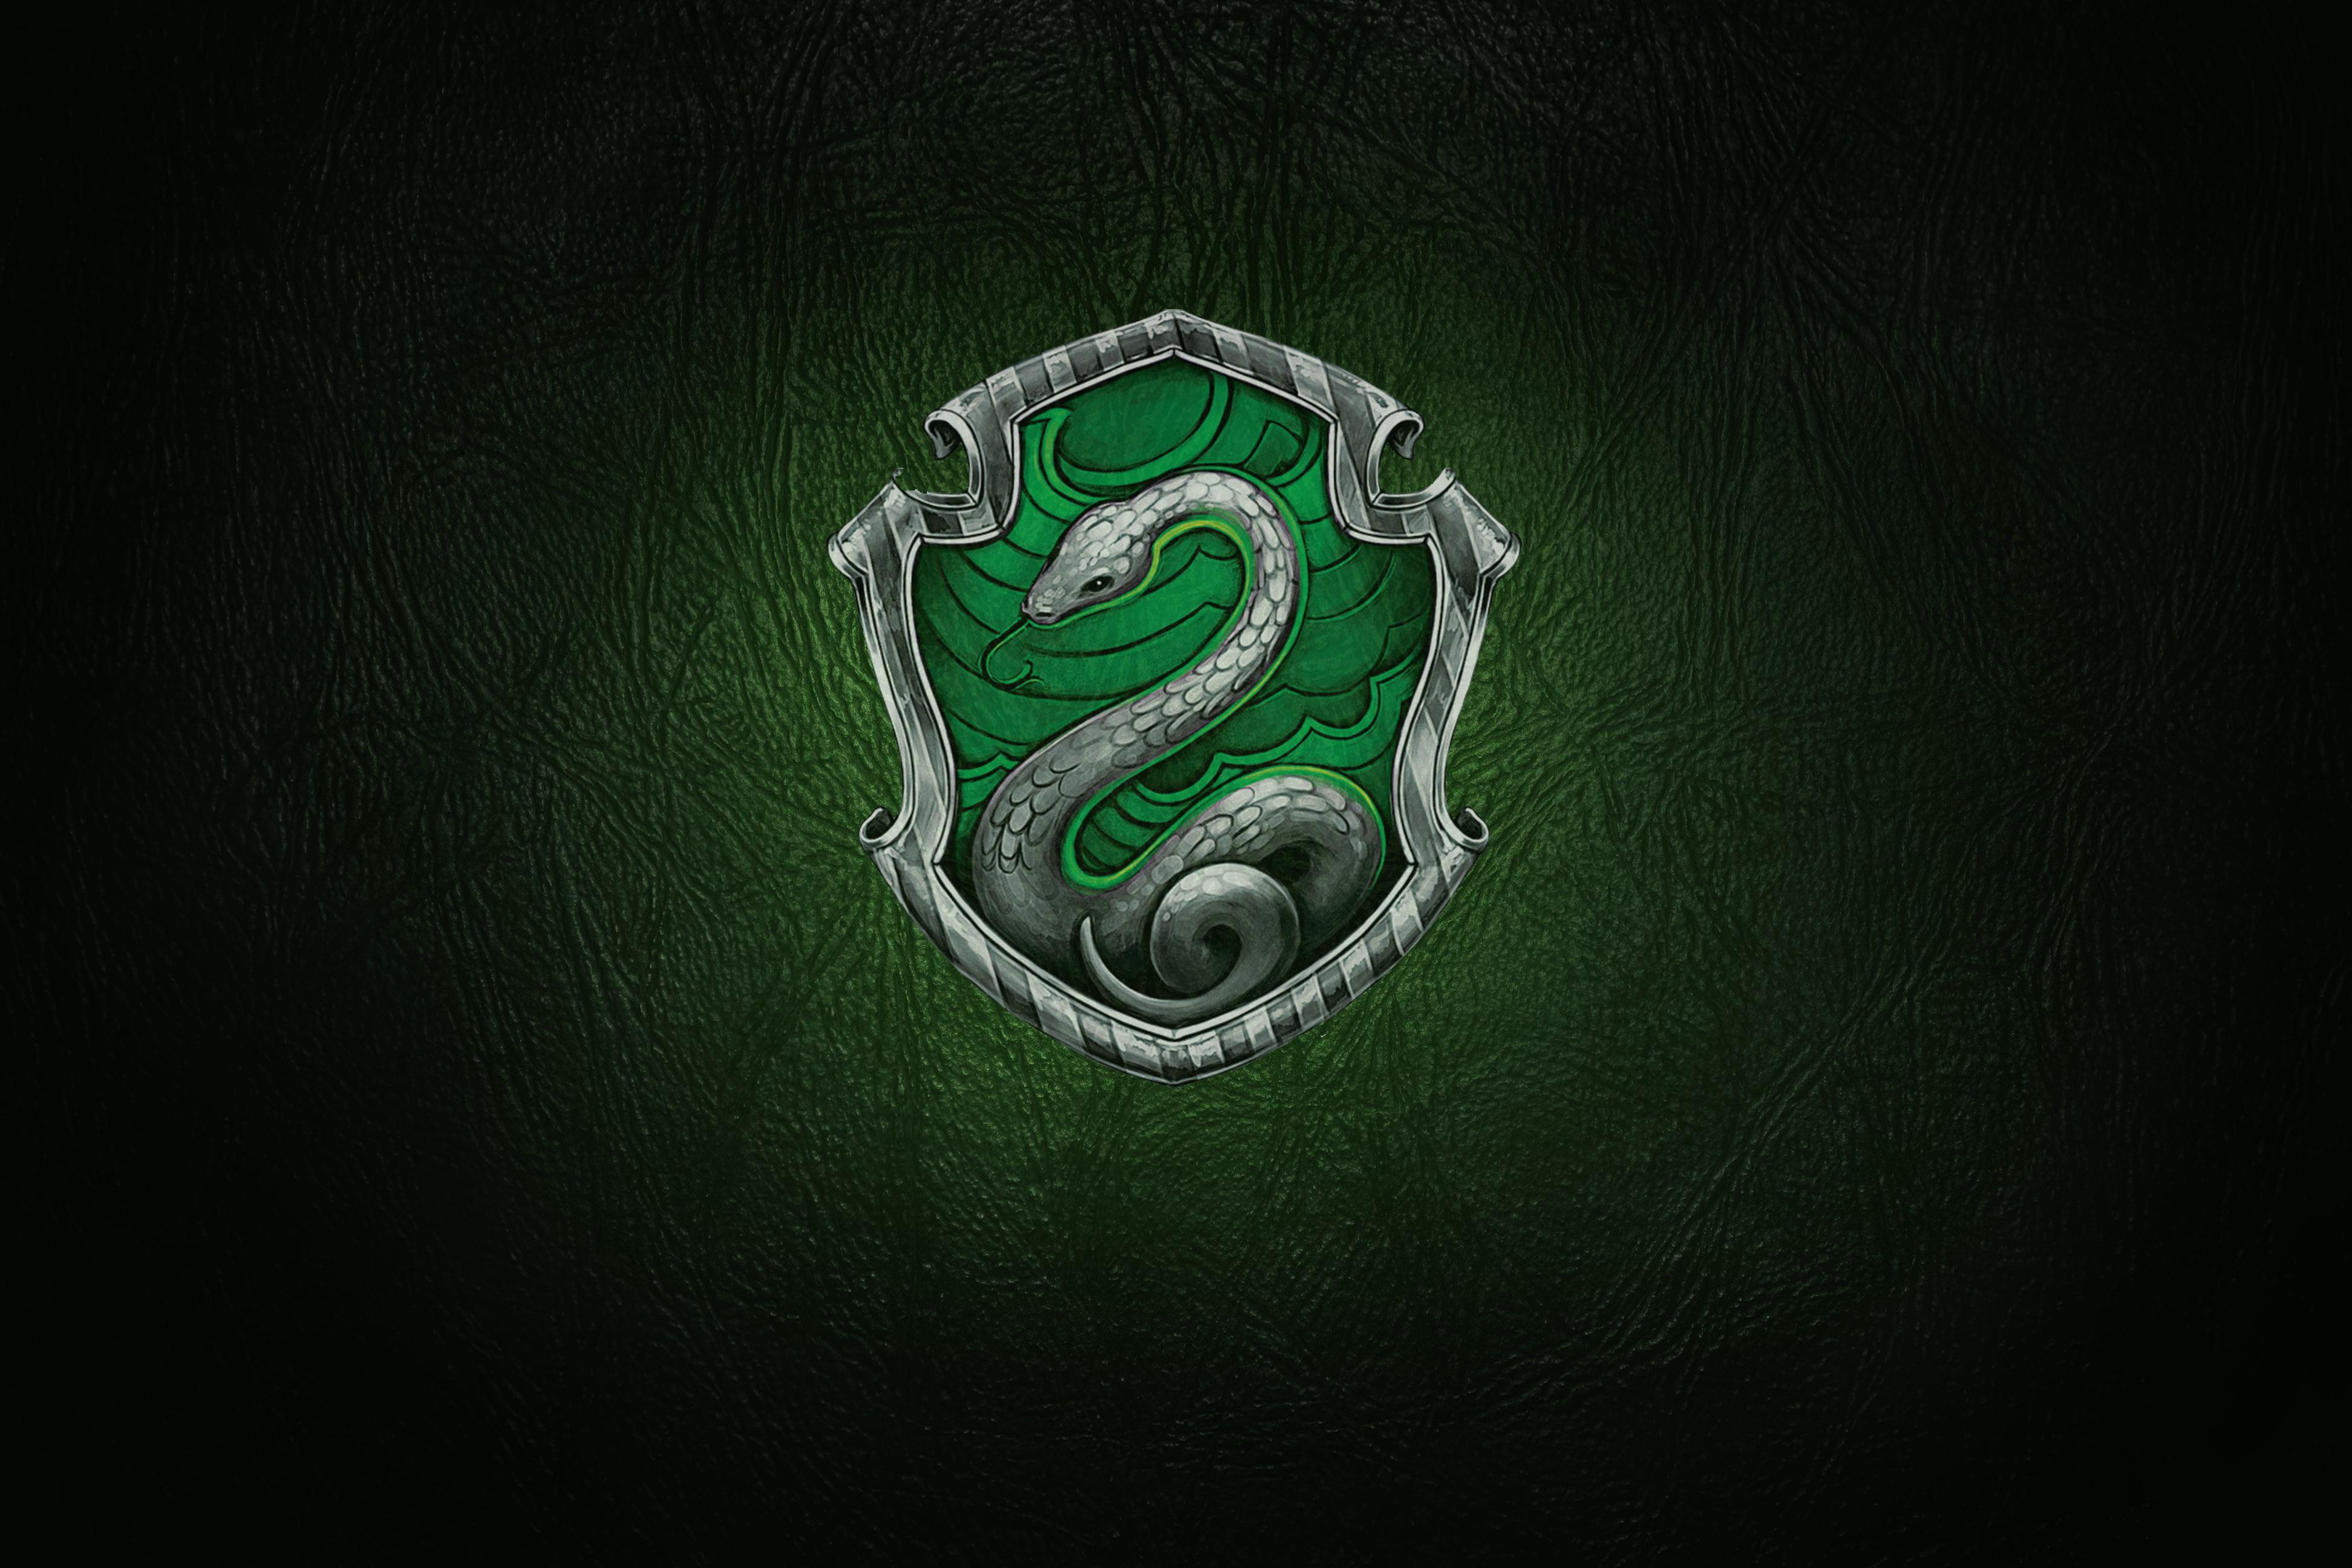 Here's a Slytherin Backgrounds for ya